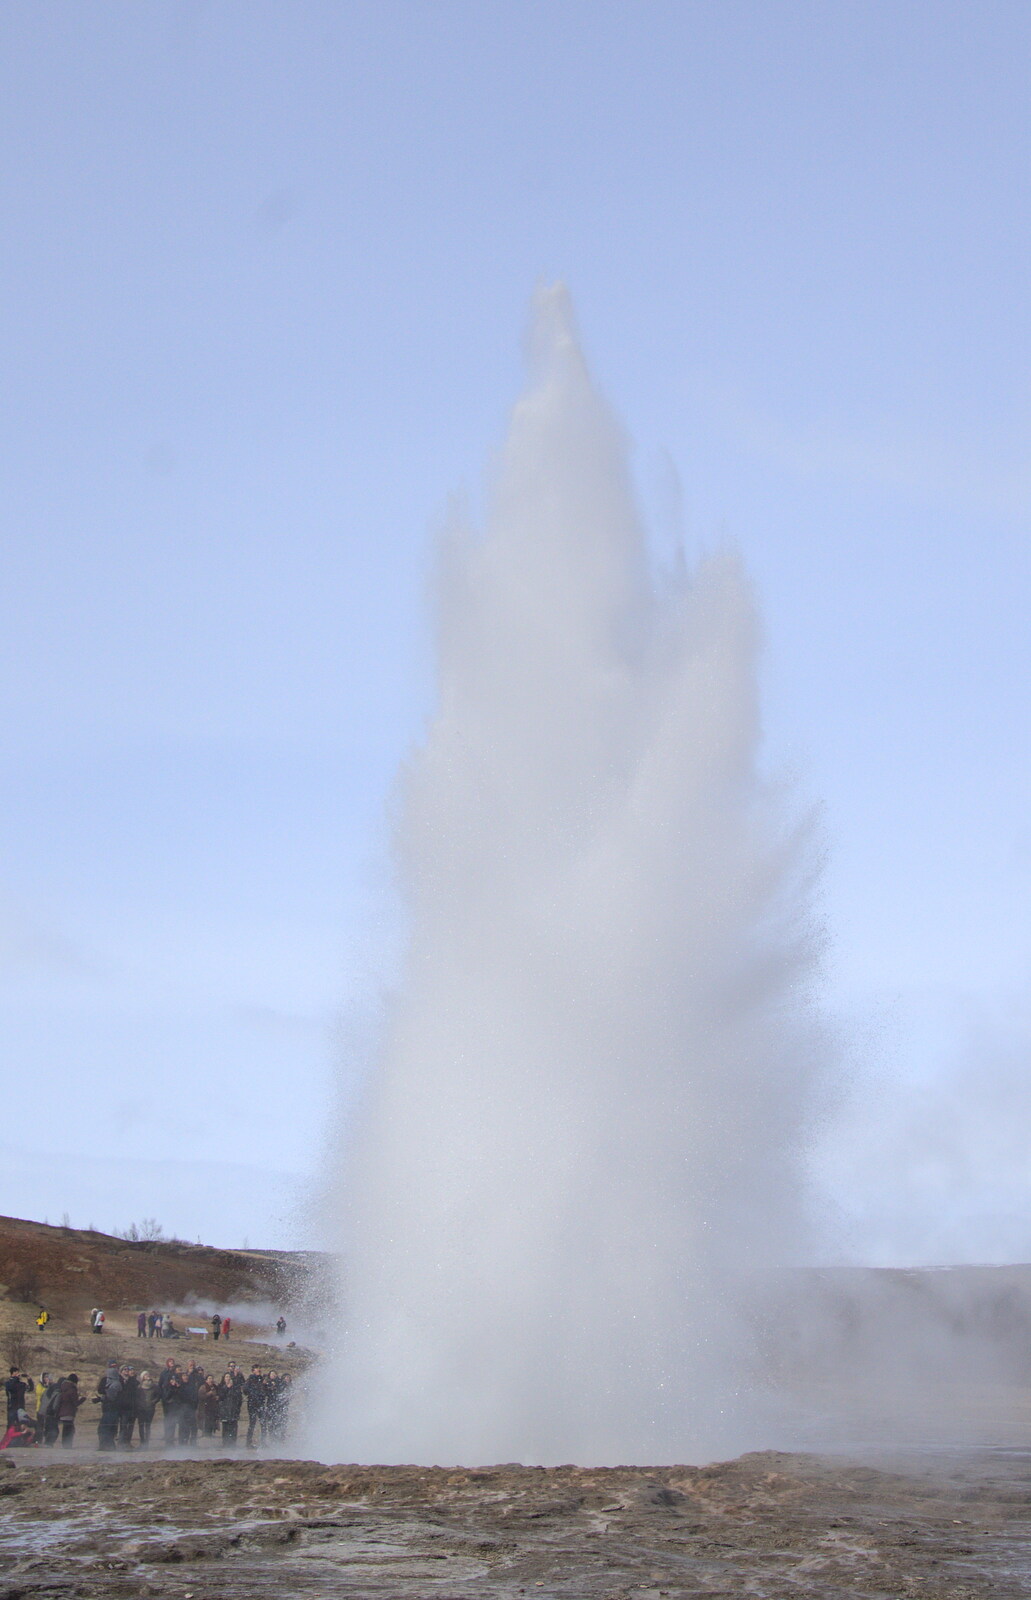 The geyser goes off again from The Golden Circle of Ísland, Iceland - 22nd April 2017